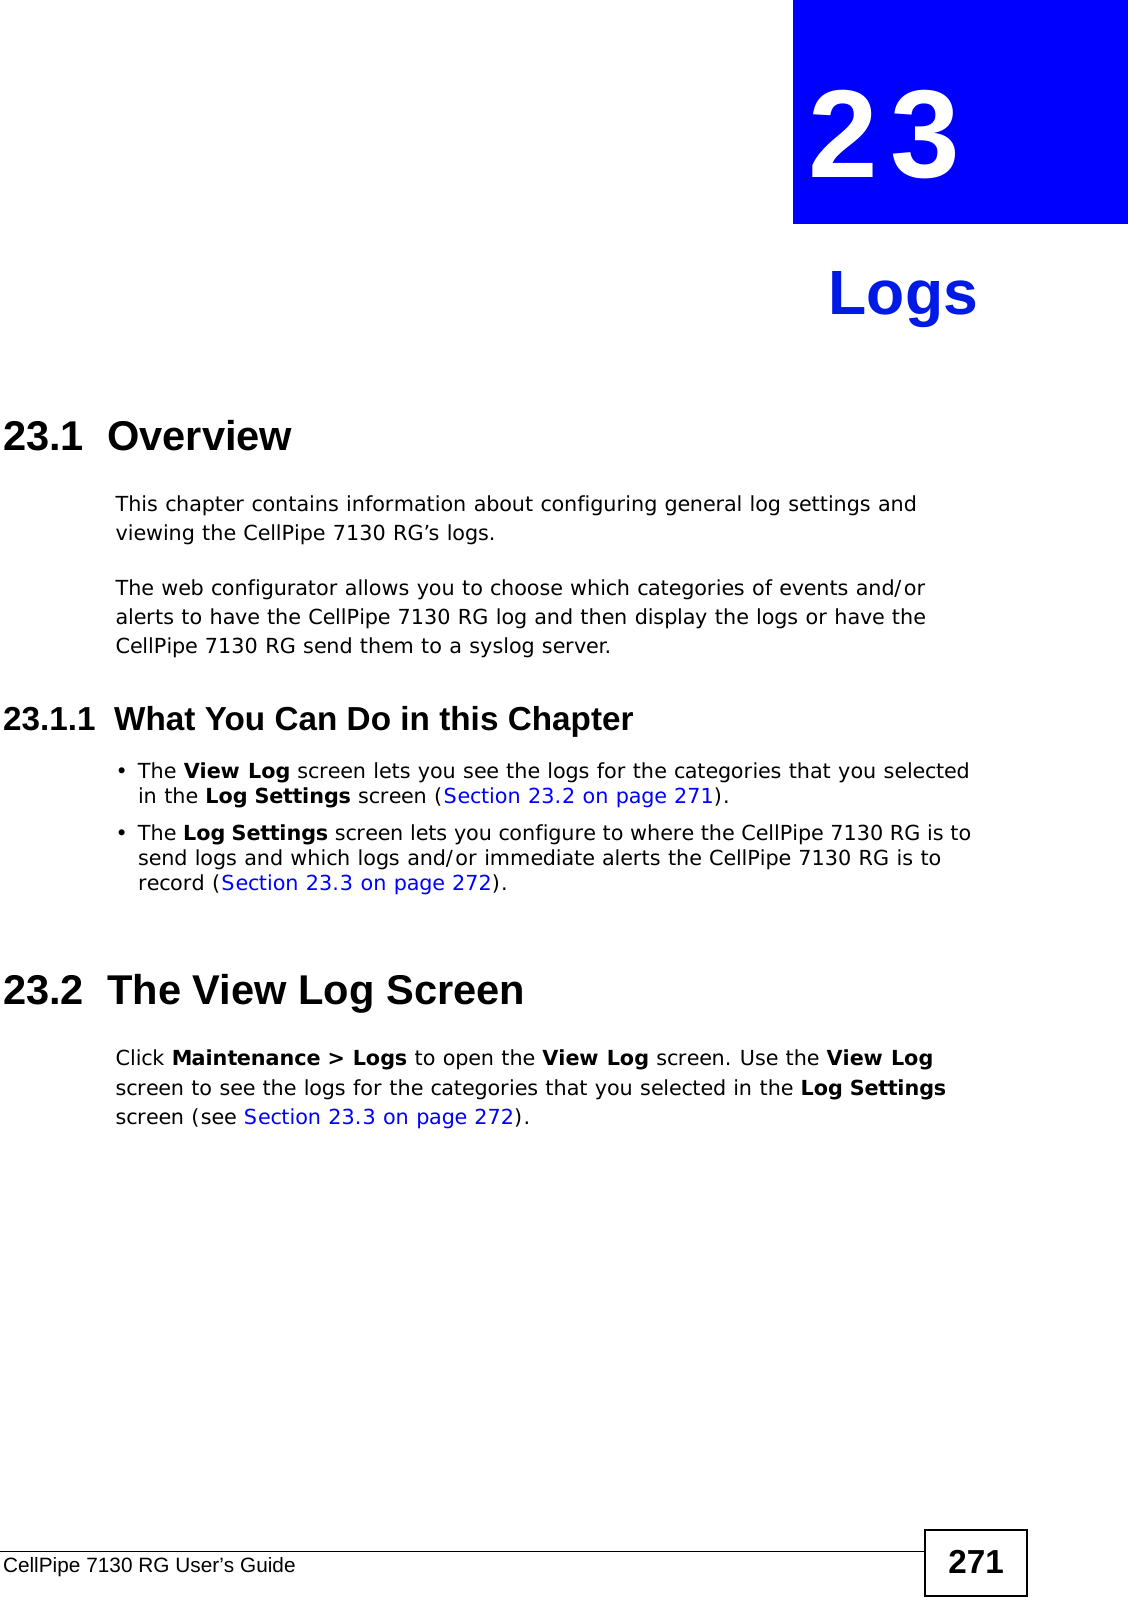 CellPipe 7130 RG User’s Guide 271CHAPTER  23 Logs23.1  Overview This chapter contains information about configuring general log settings and viewing the CellPipe 7130 RG’s logs.The web configurator allows you to choose which categories of events and/or alerts to have the CellPipe 7130 RG log and then display the logs or have the CellPipe 7130 RG send them to a syslog server. 23.1.1  What You Can Do in this Chapter•The View Log screen lets you see the logs for the categories that you selected in the Log Settings screen (Section 23.2 on page 271).•The Log Settings screen lets you configure to where the CellPipe 7130 RG is to send logs and which logs and/or immediate alerts the CellPipe 7130 RG is to record (Section 23.3 on page 272).23.2  The View Log ScreenClick Maintenance &gt; Logs to open the View Log screen. Use the View Log screen to see the logs for the categories that you selected in the Log Settings screen (see Section 23.3 on page 272). 